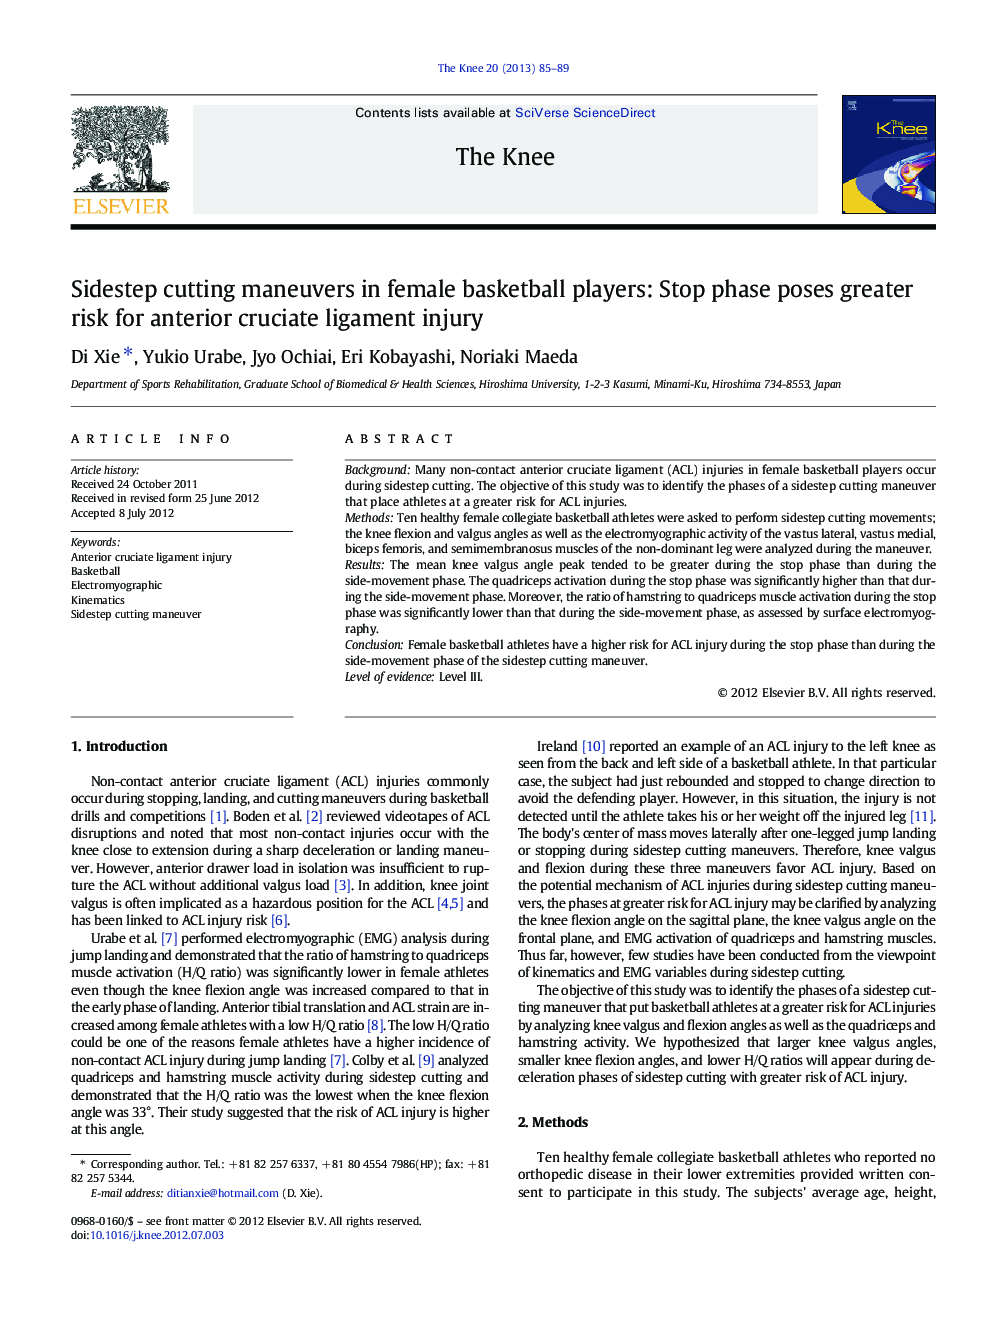 Sidestep cutting maneuvers in female basketball players: Stop phase poses greater risk for anterior cruciate ligament injury